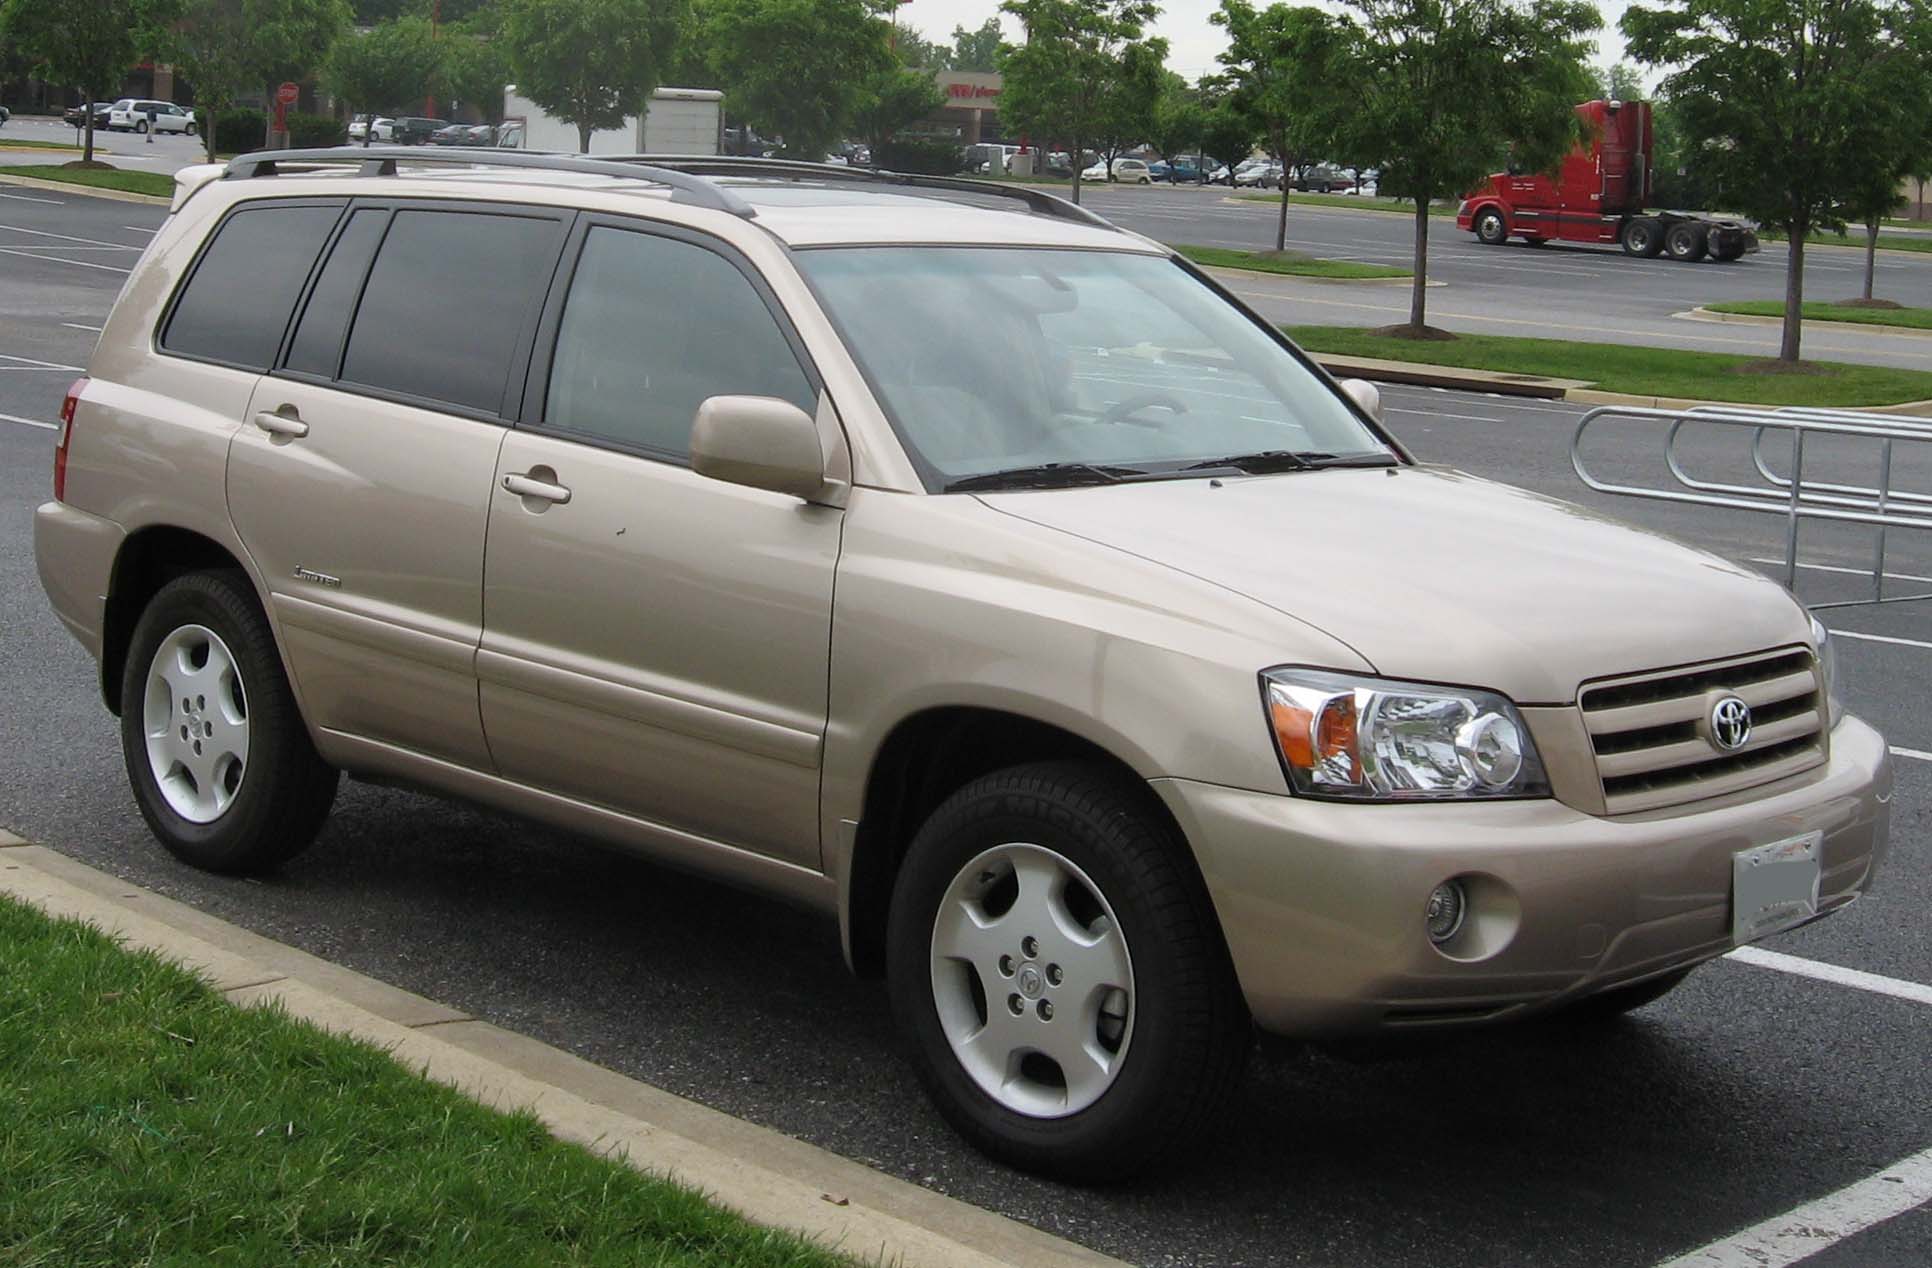 Toyota kluger 2003 photo - 5